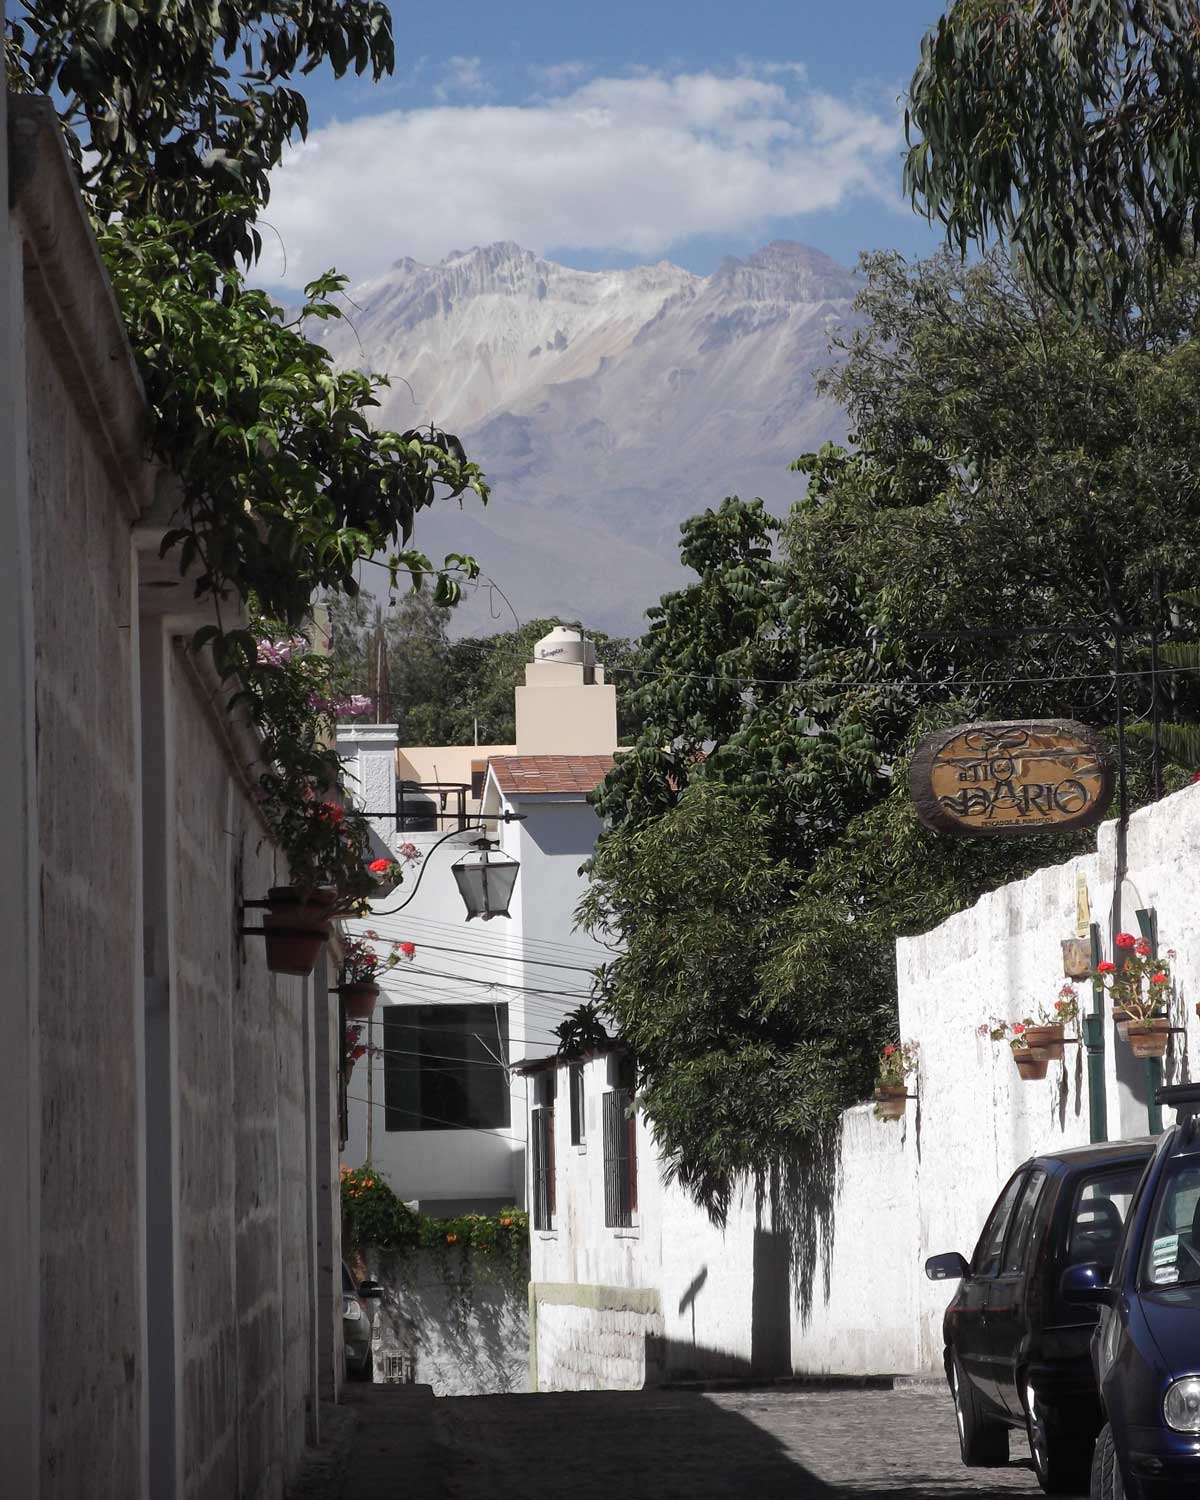 Chachani Volcano from the streets of Arequipa, Peru | ©Eleanor Hughes